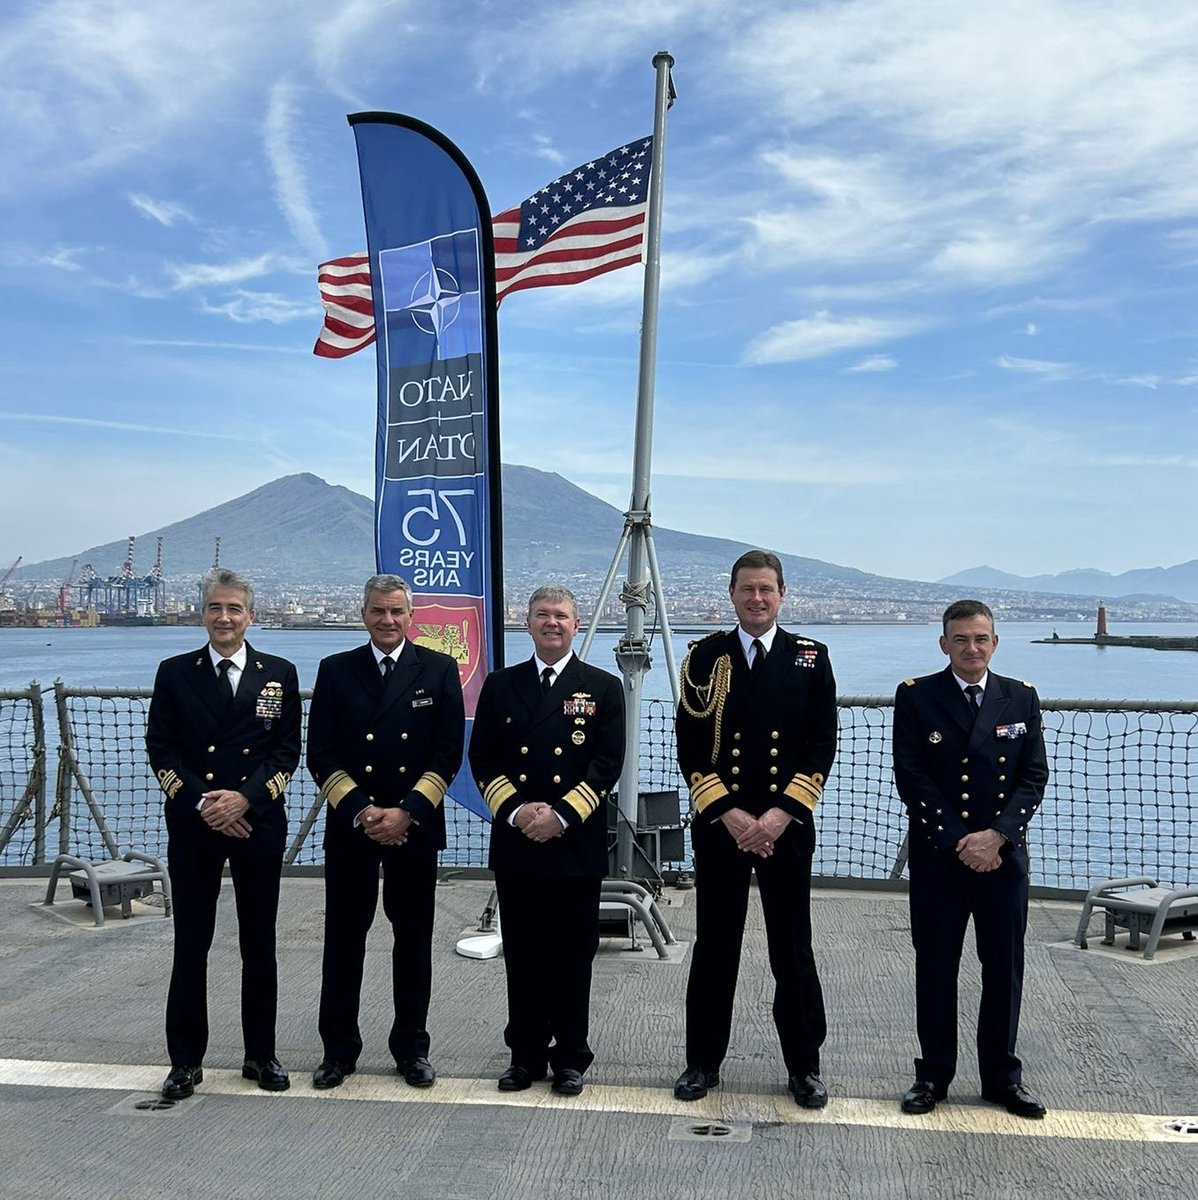 A privilege to represent the @RoyalNavy at the celebrations for #1NATO75years & conduct talks with @NATO partners over the opportunities ahead to work together & enhance our collective capability @USNavyEurope @JFC_Naples @UKNATO